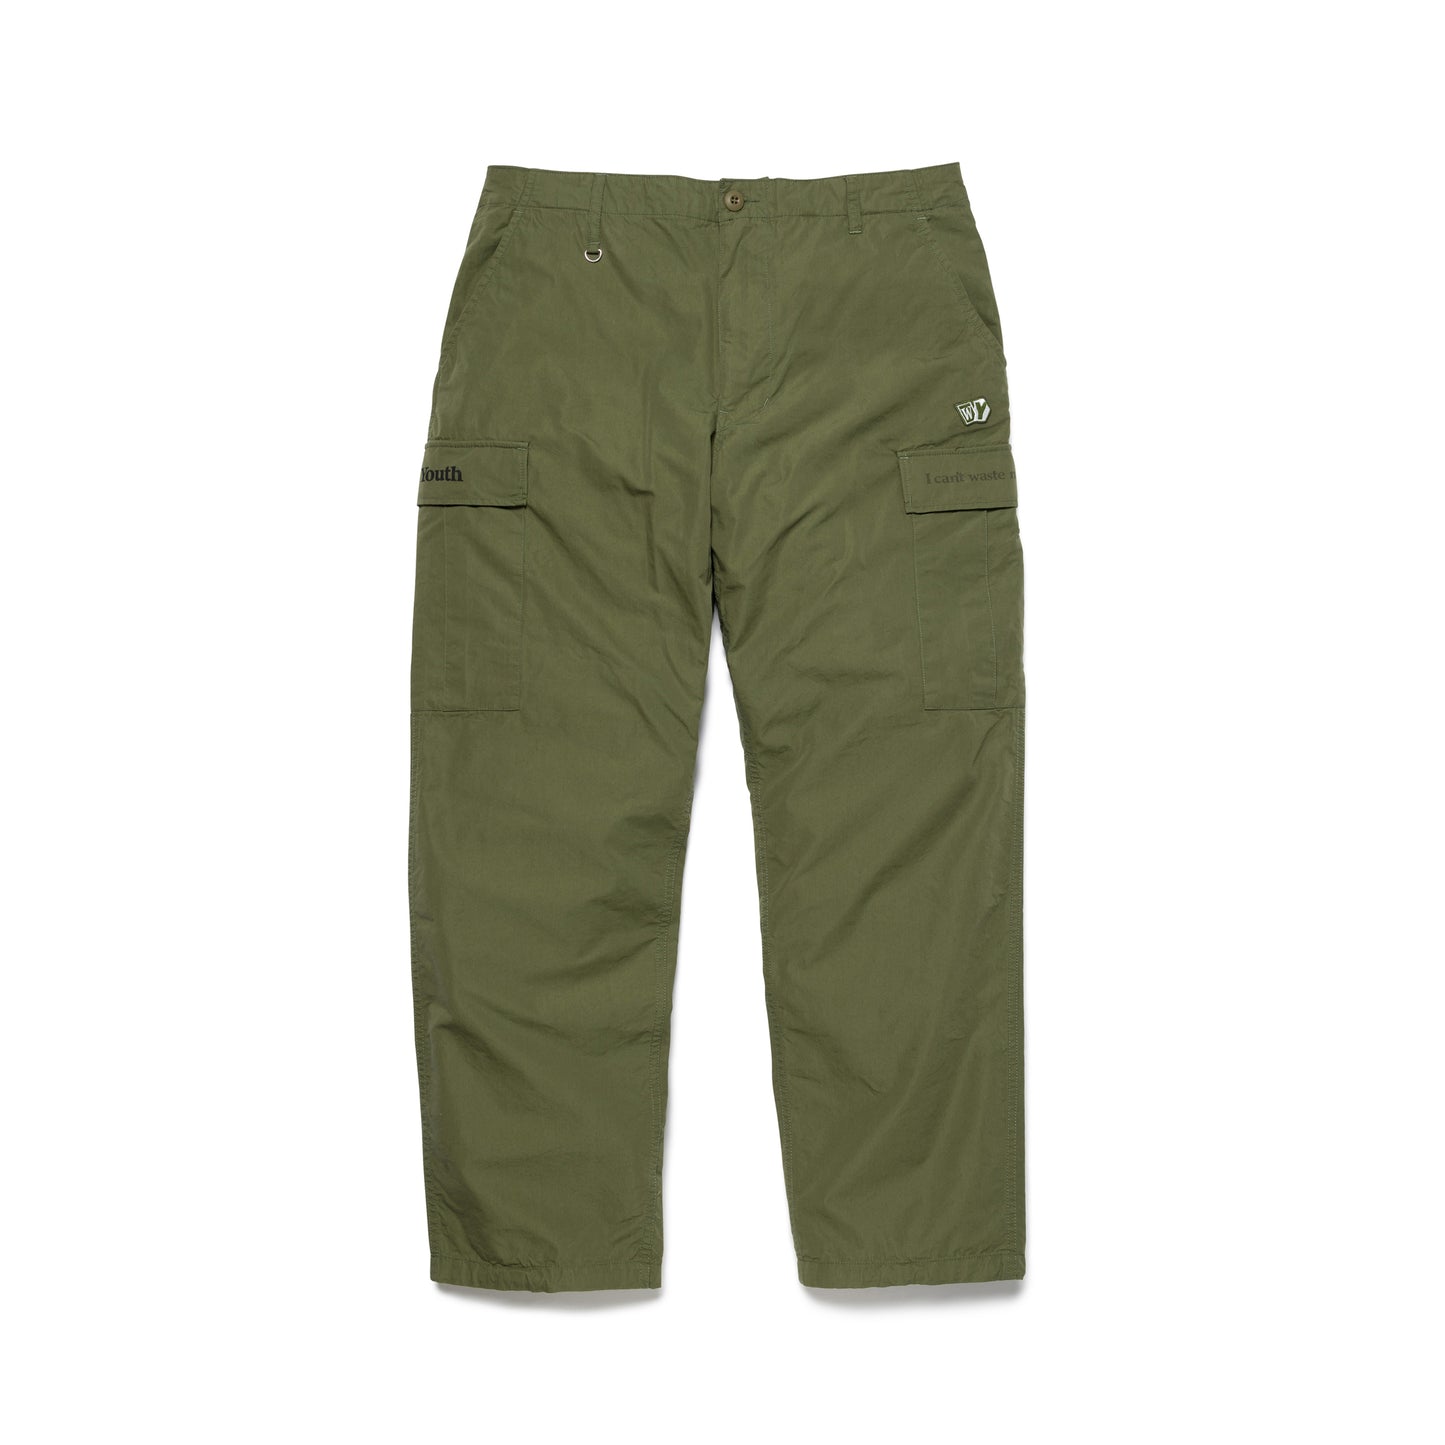 Wasted Youth CARGO PANTS OD-A